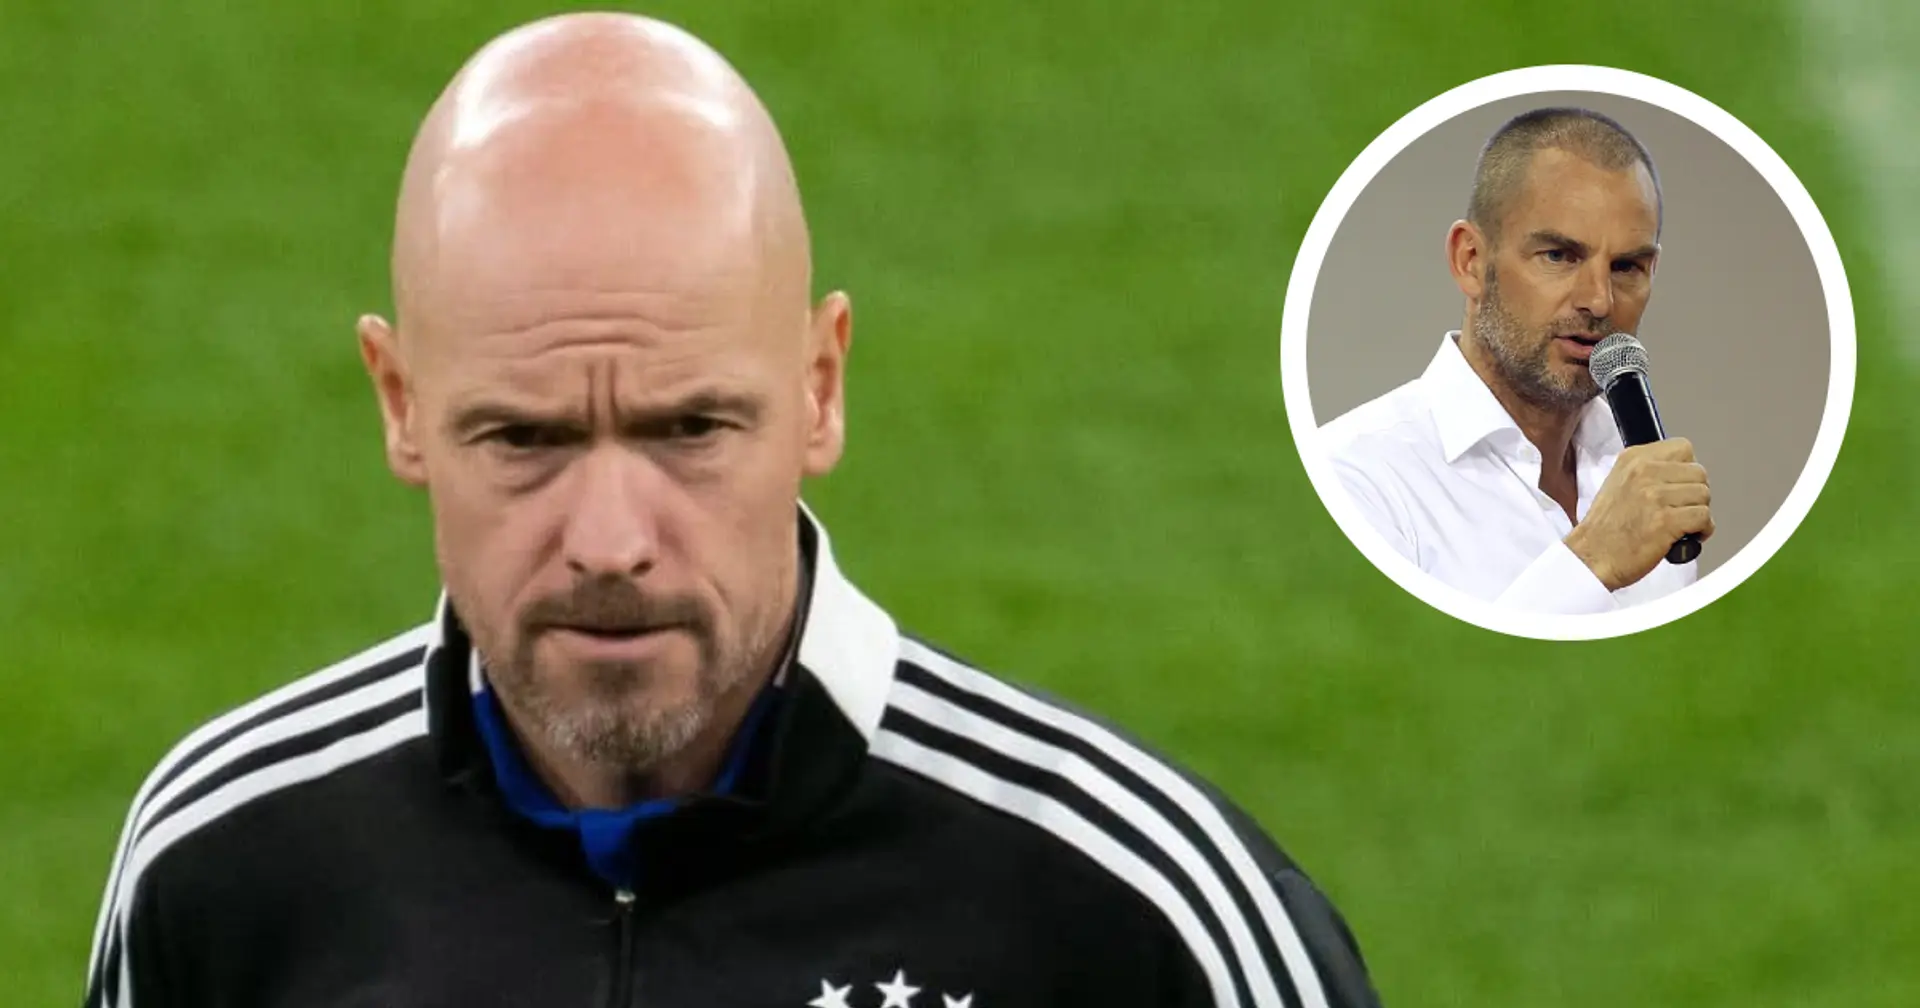 'Jumping on a sinking ship': Ronald de Boer on how Ten Hag's move to Man United is viewed in the Netherlands